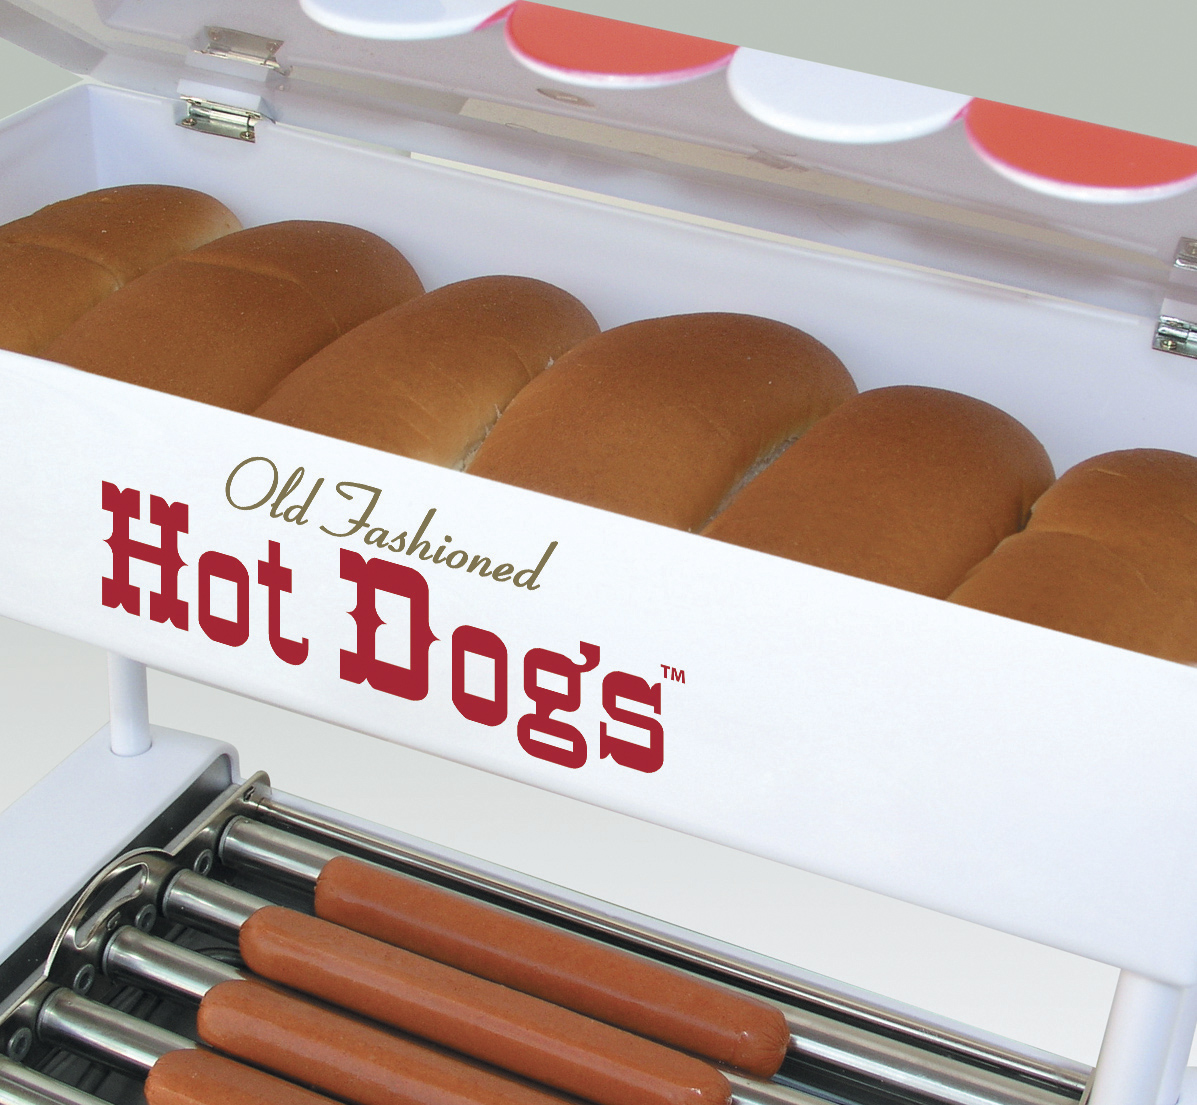 Nostalgia HDR565 Countertop Hot Dog Roller and Warmer, 8 Regular Sized or 4 Foot Long Hot Dogs and 6 Bun Capacity – White - image 4 of 4